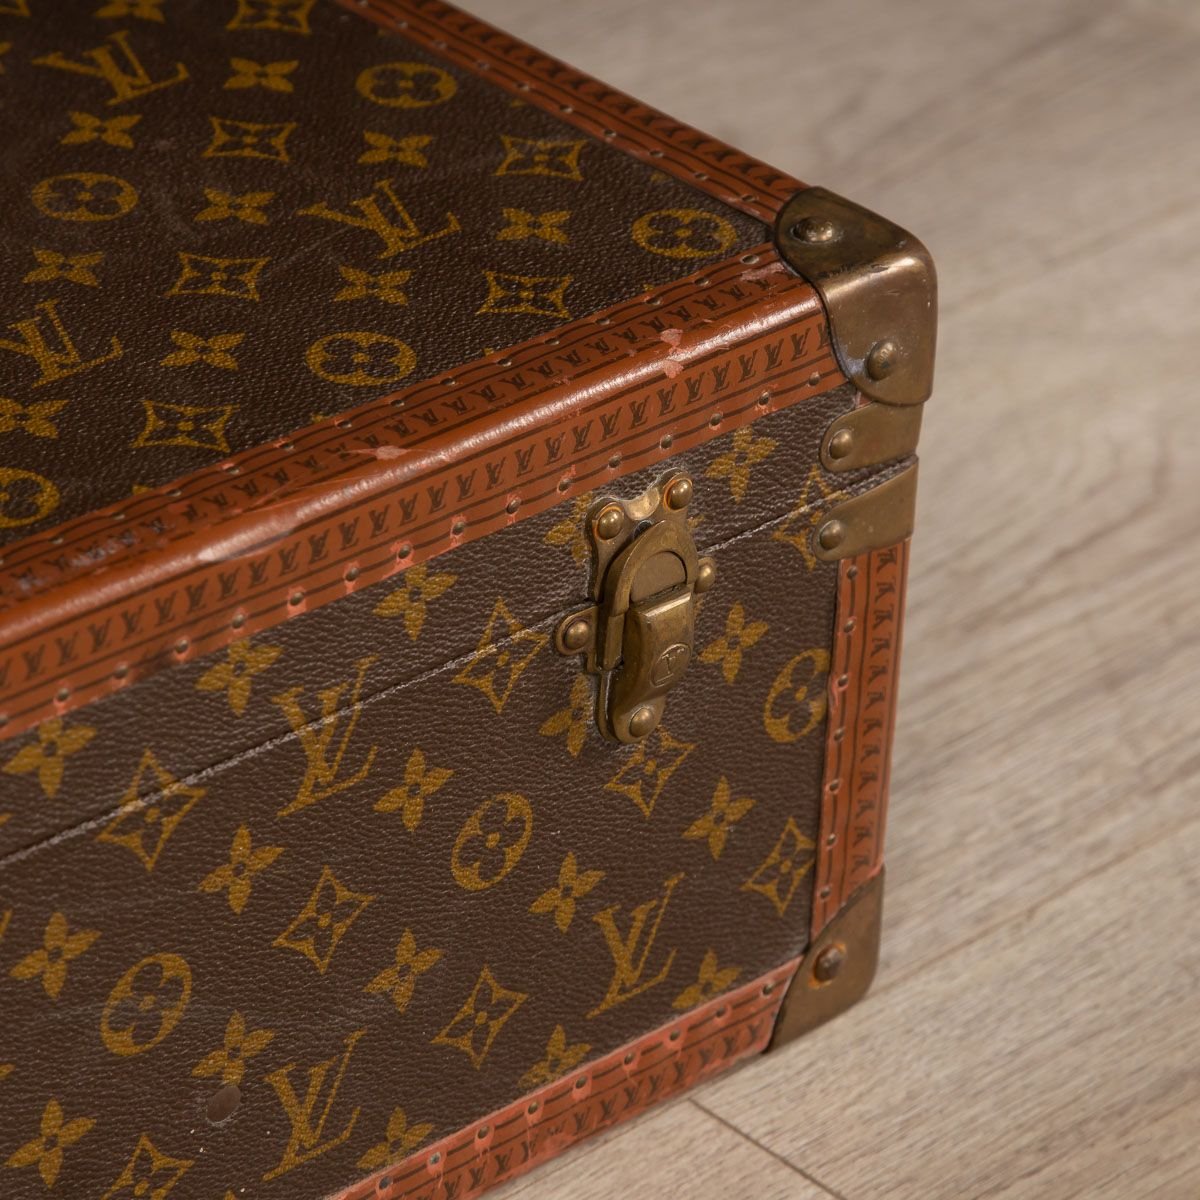 Vintage French Monogrammed Fabric Suitcase from Louis Vuitton, 1970s for sale at Pamono